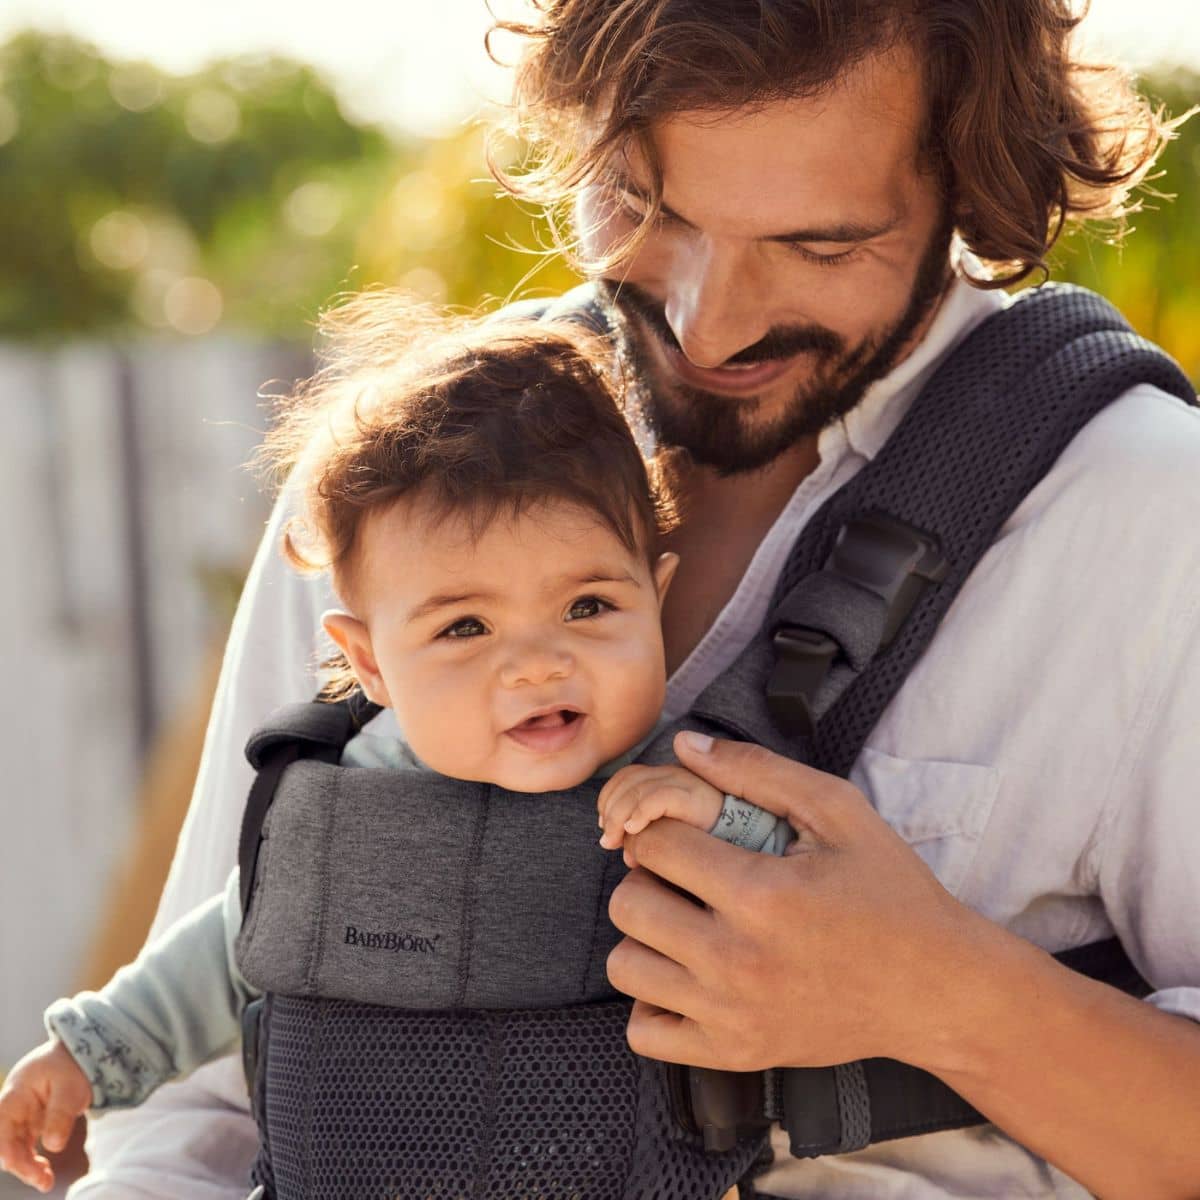 BabyBjorn Baby Carrier Harmony - Anthracite 3D Mesh